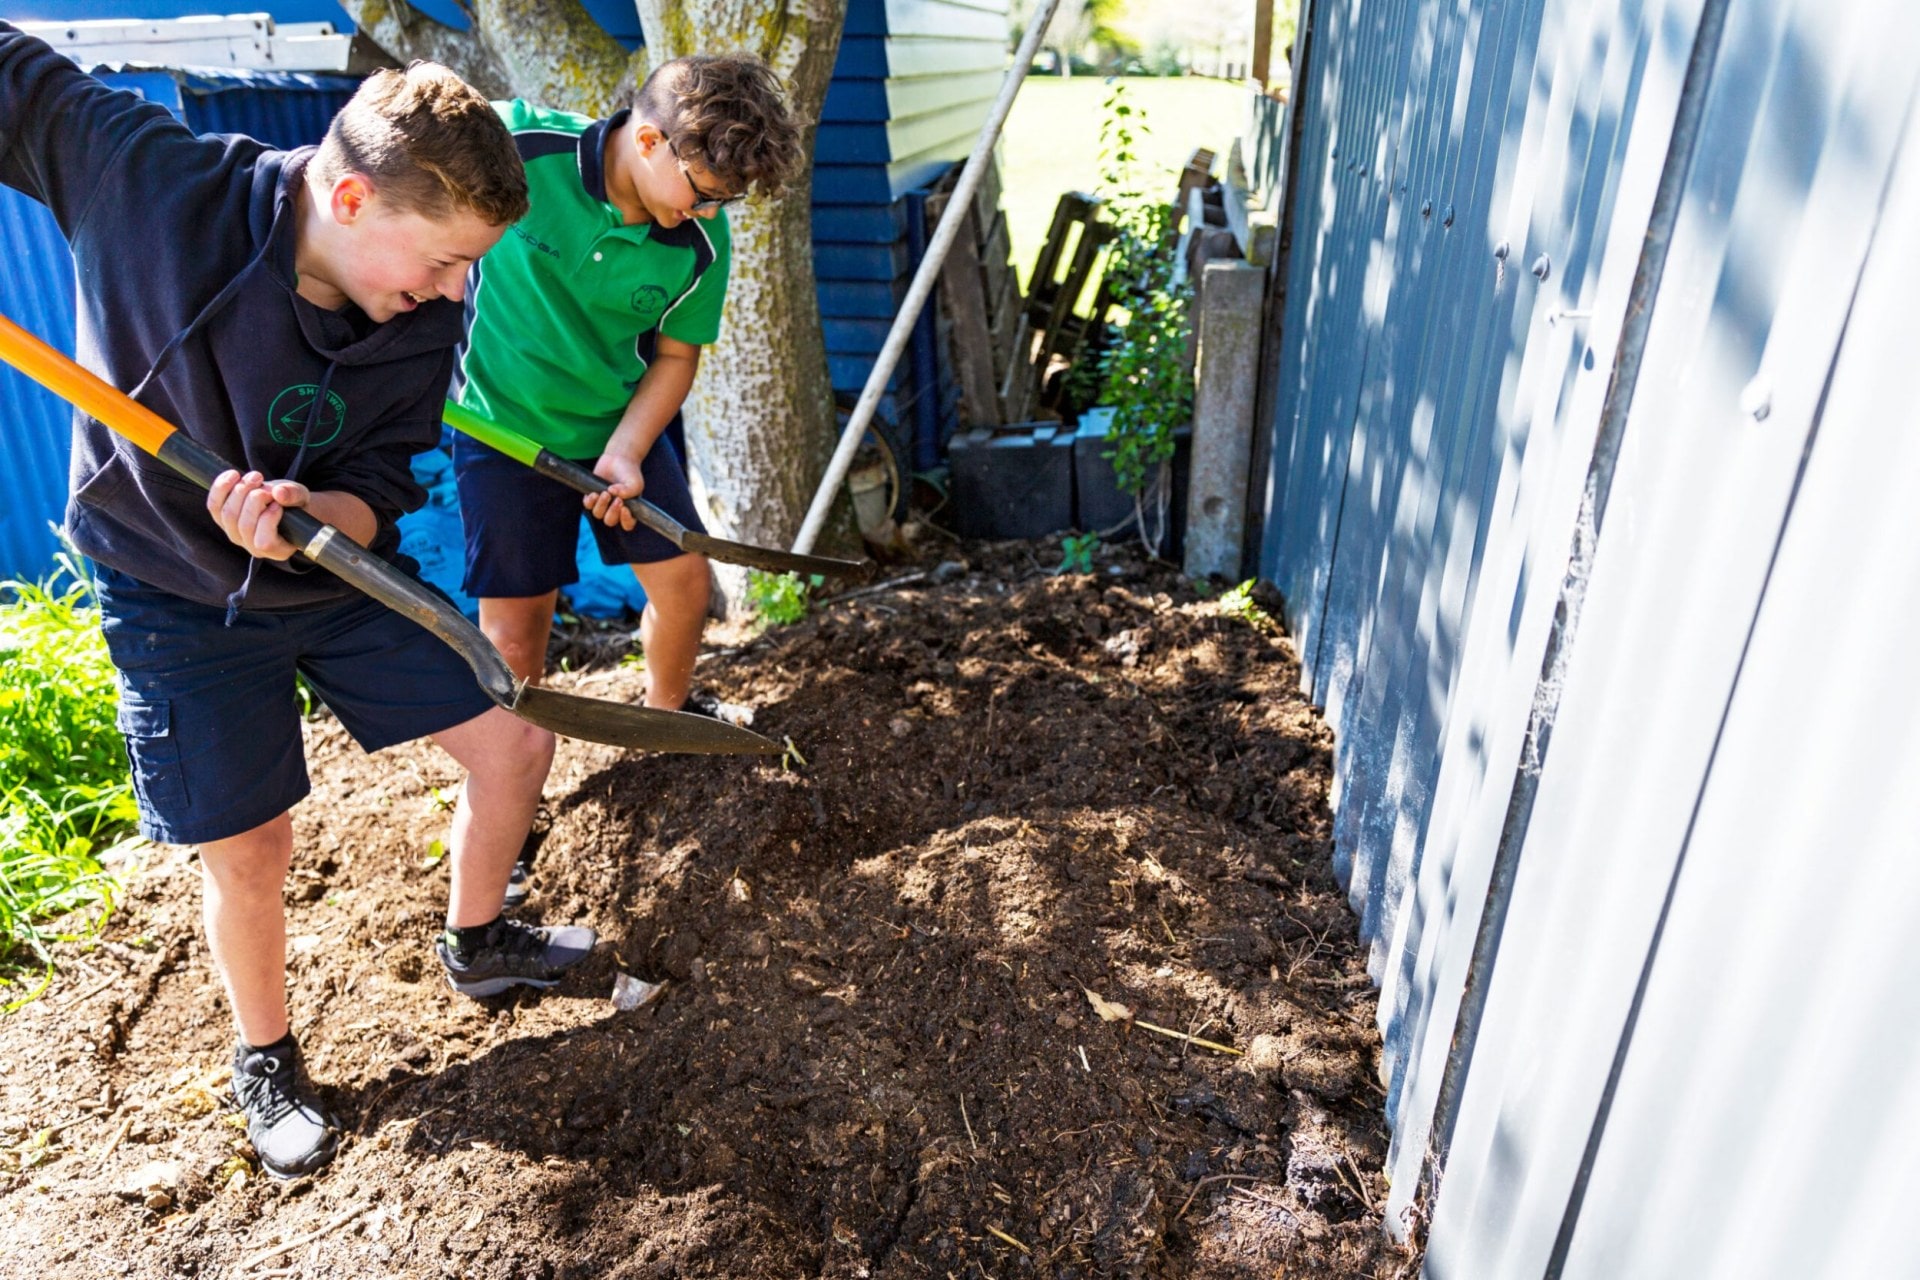 Two boys digging with spades in compost